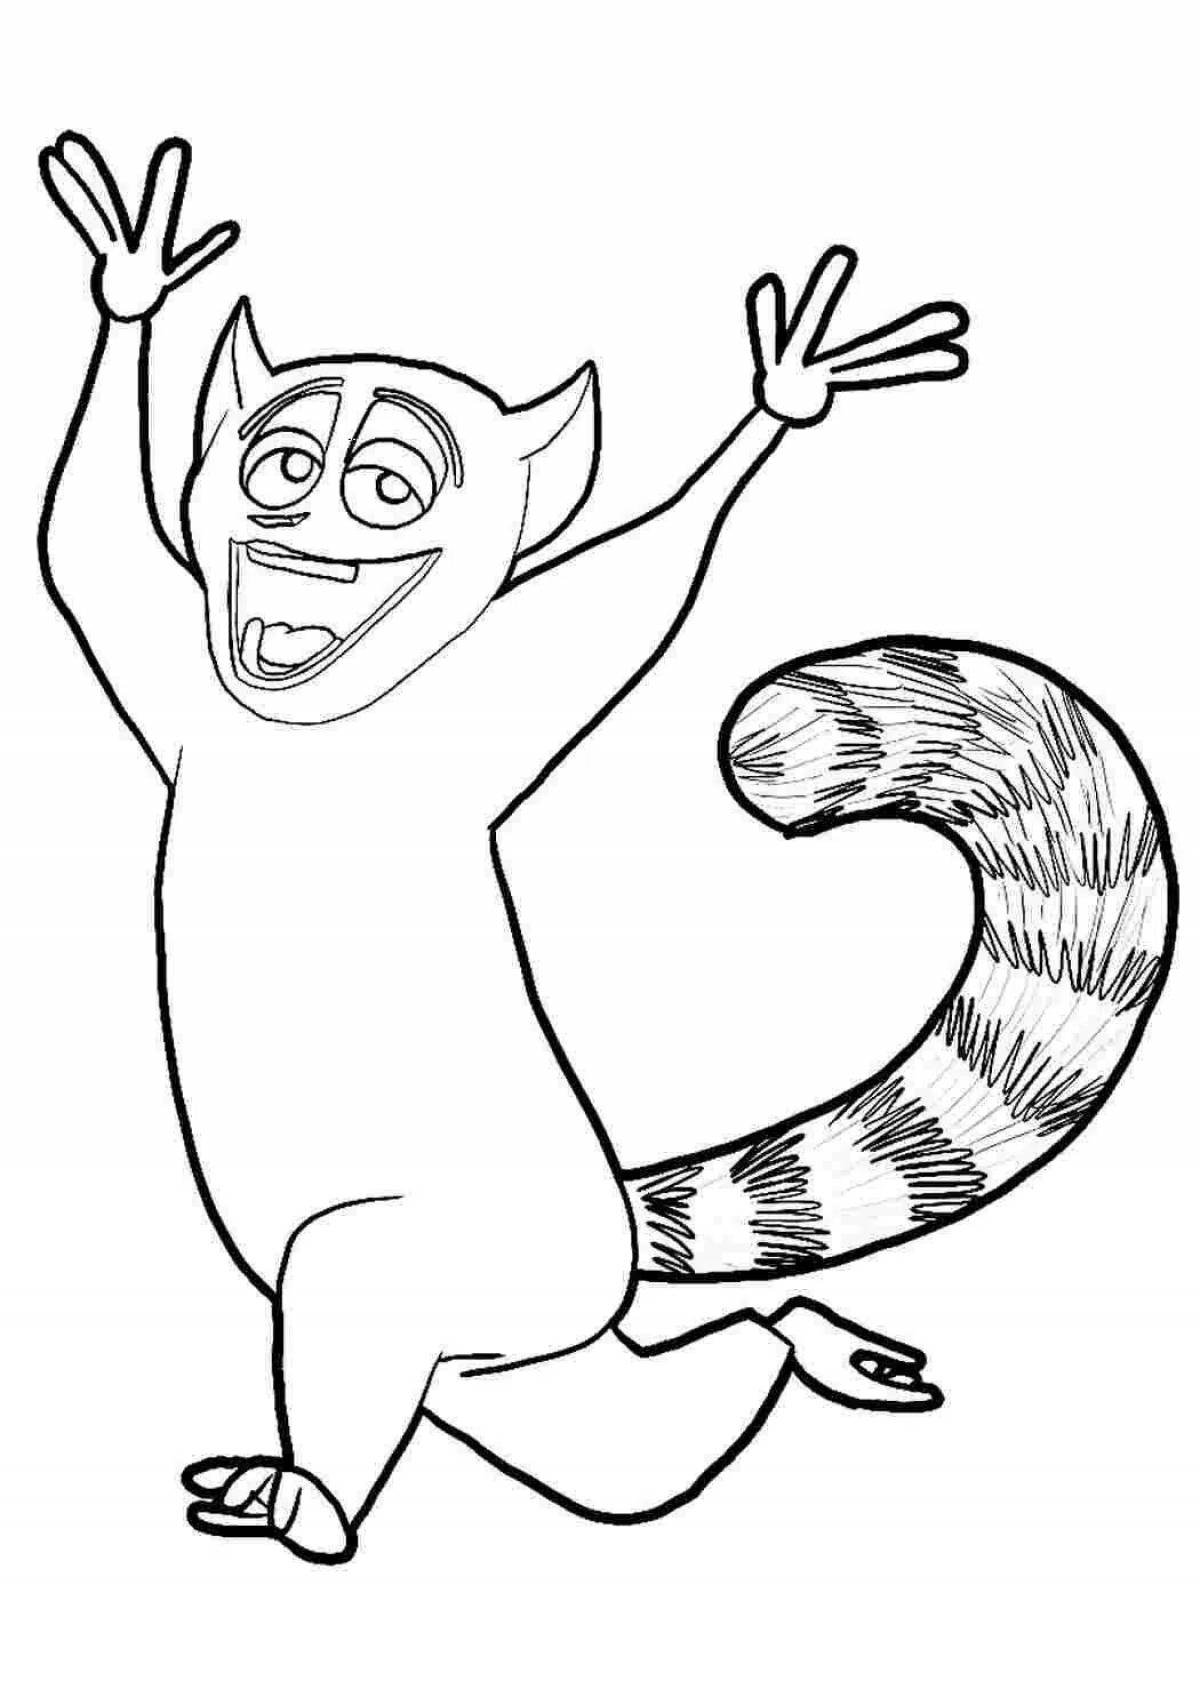 Coloring page majestic king julian